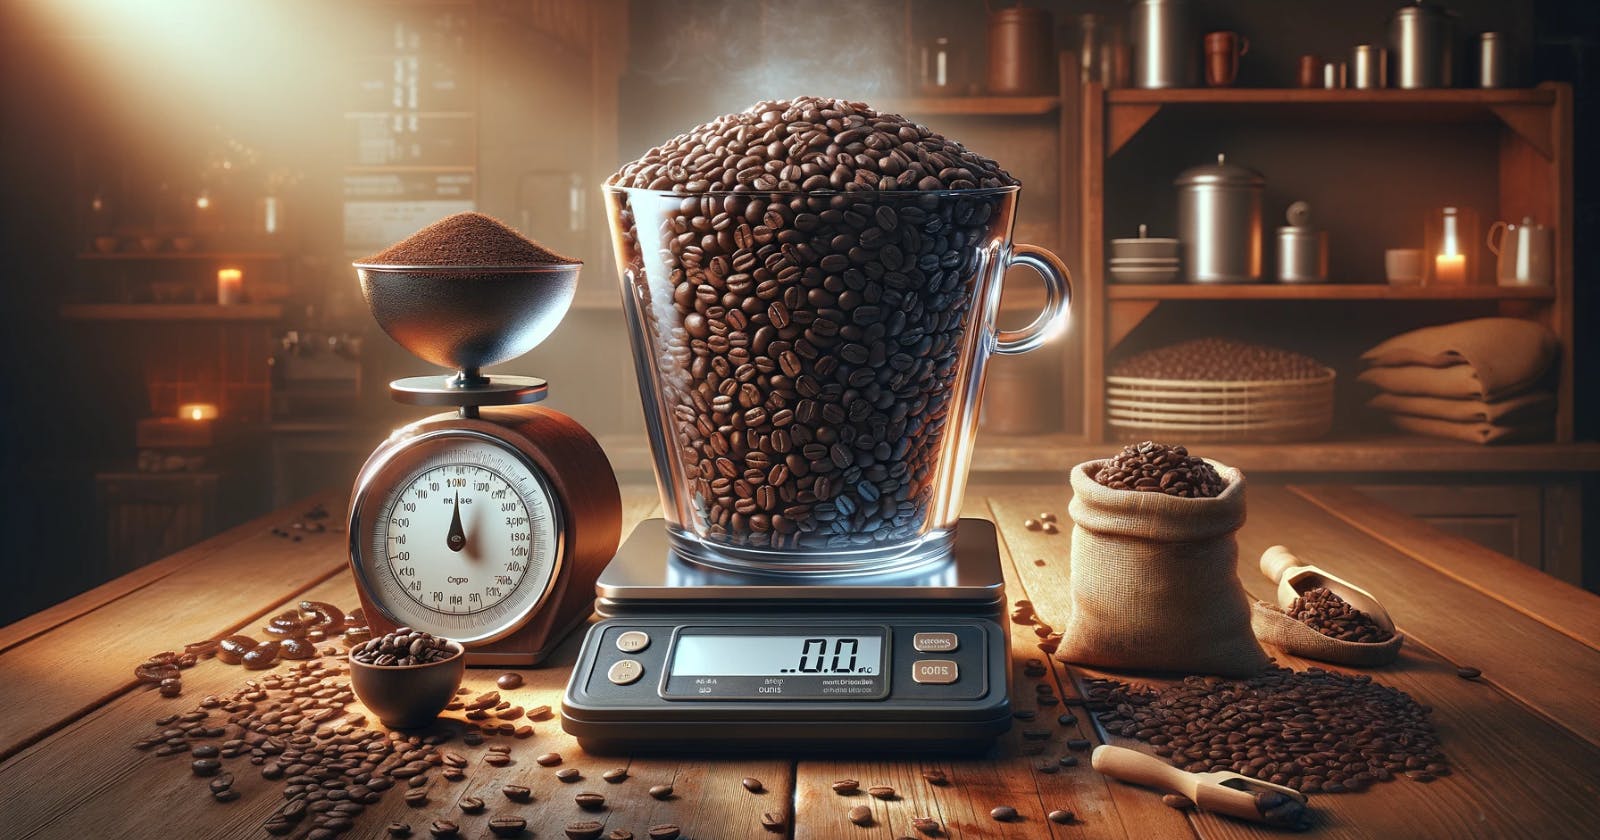 How Many Coffee Beans Per Cup?